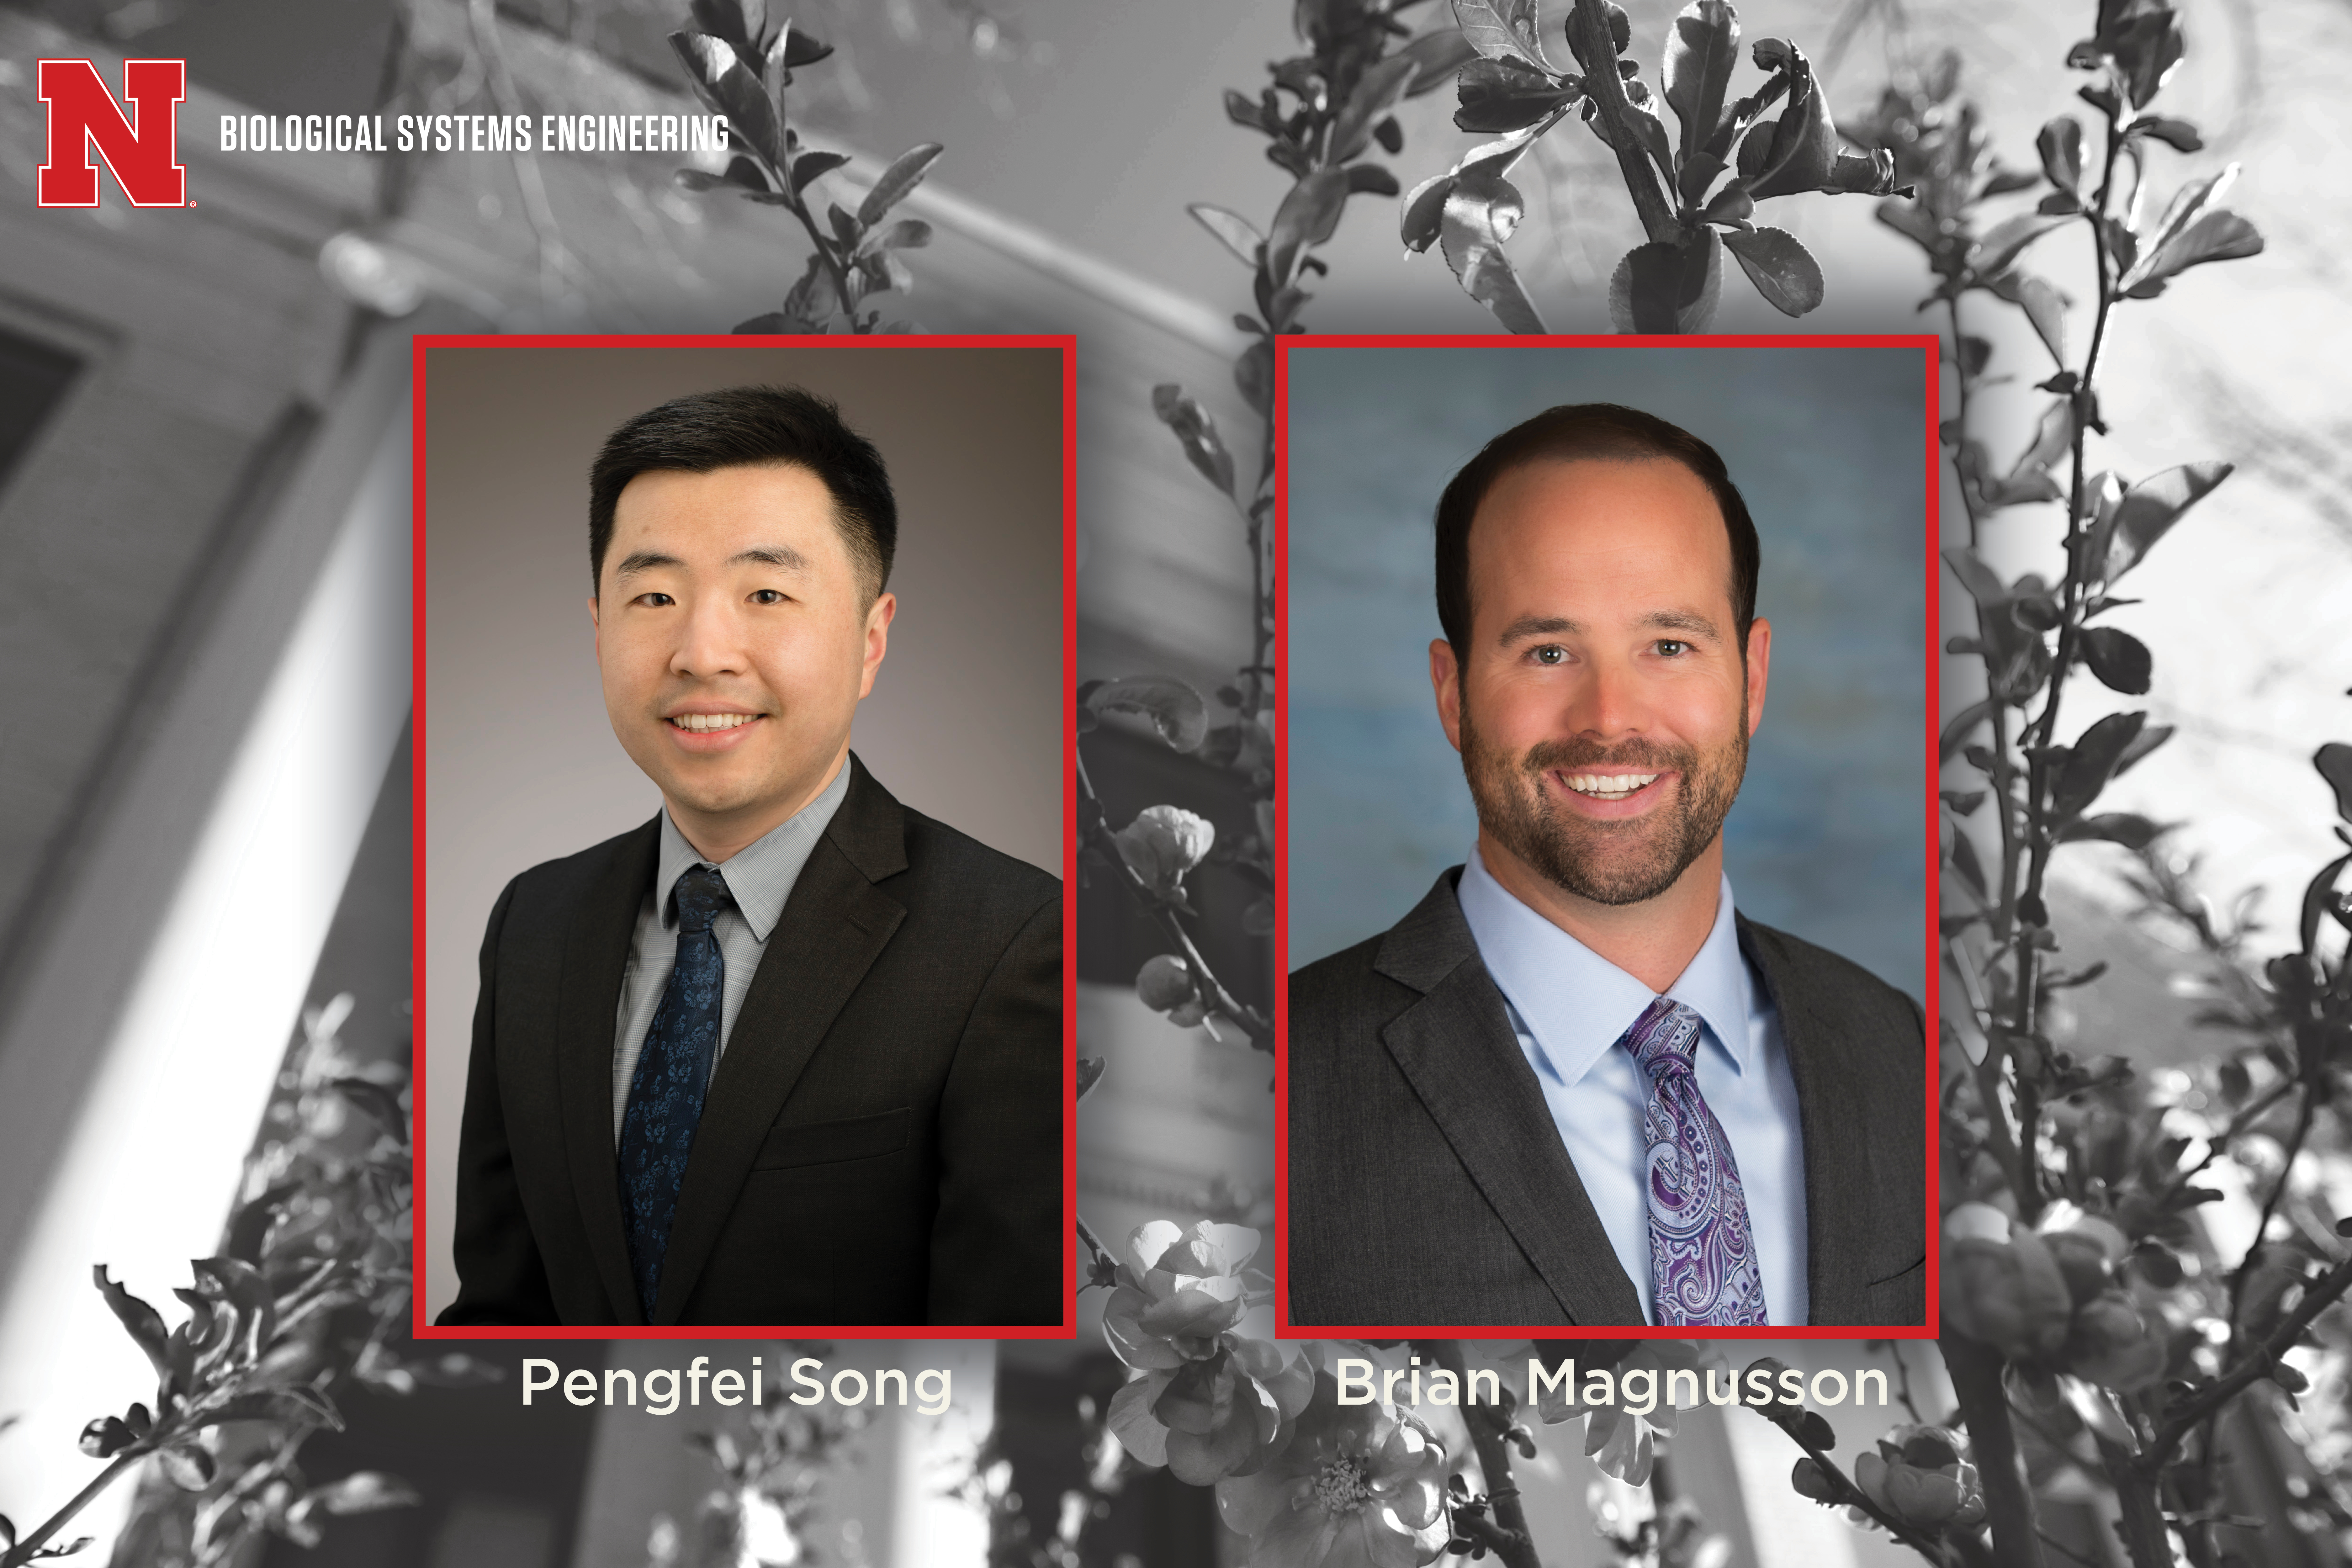 Pengfei Song and Brian Magnusson are the 2022 BSE career award winners.